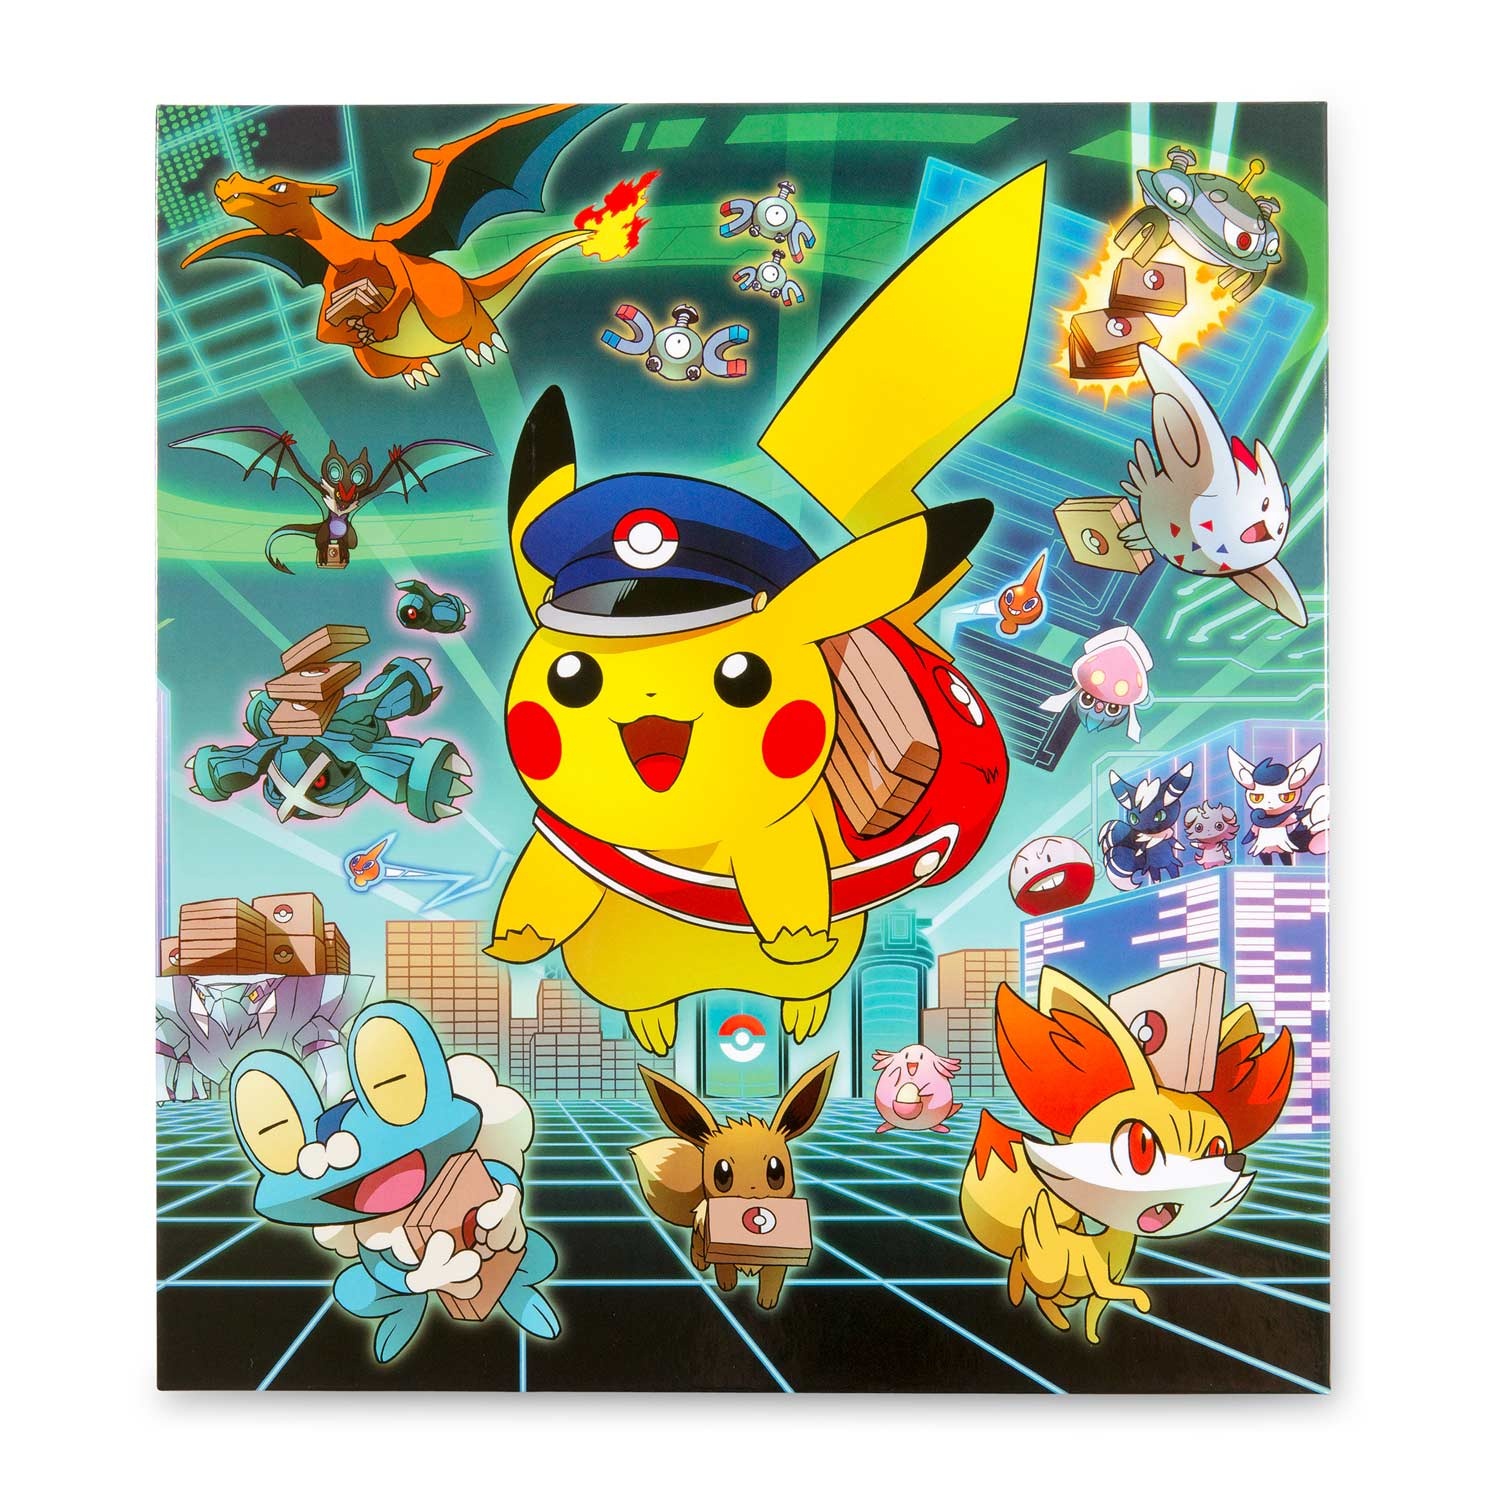 Pokemon Binder Cover Printable (79+ Images In Collection) Page 1 - Pokemon Binder Cover Printable Free